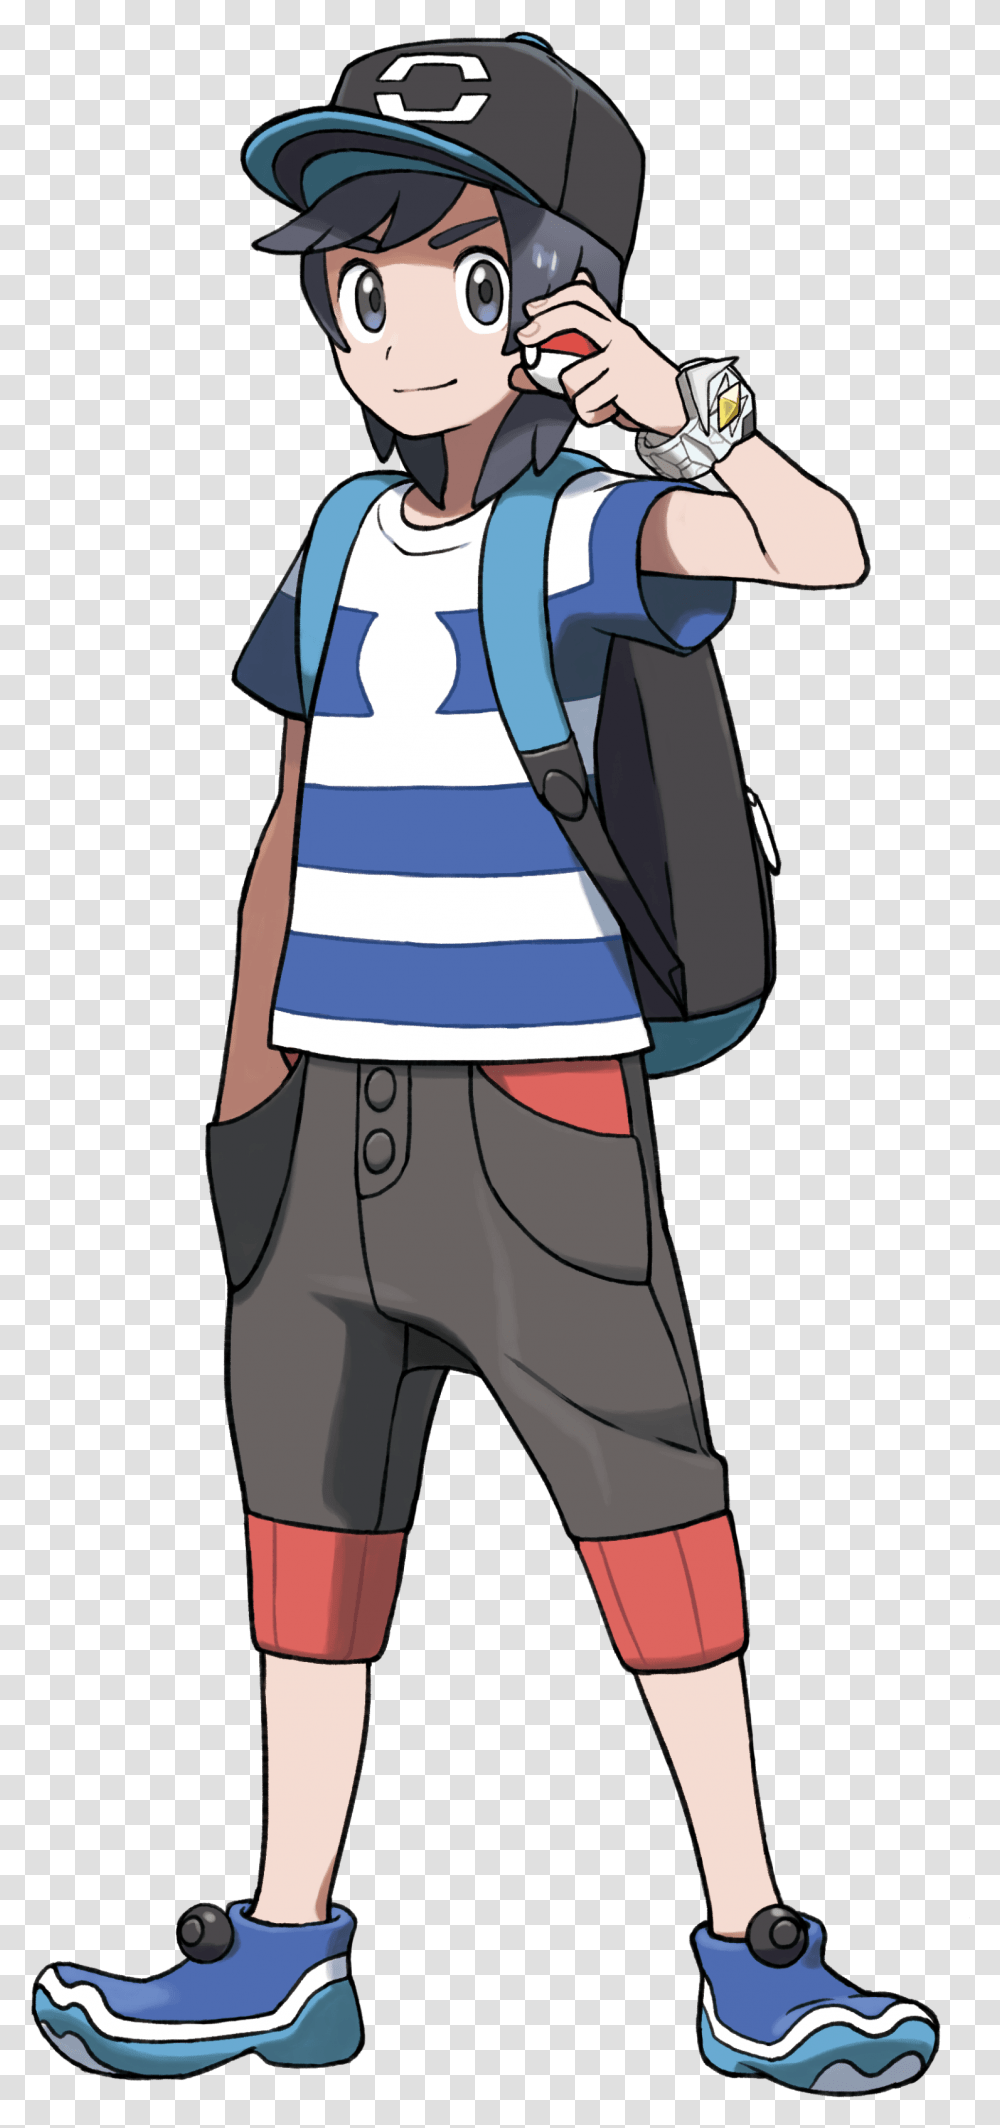 Pokemon Trainers Pokemon Sun And Moon Trainer, Clothing, Person, Costume, Pants Transparent Png